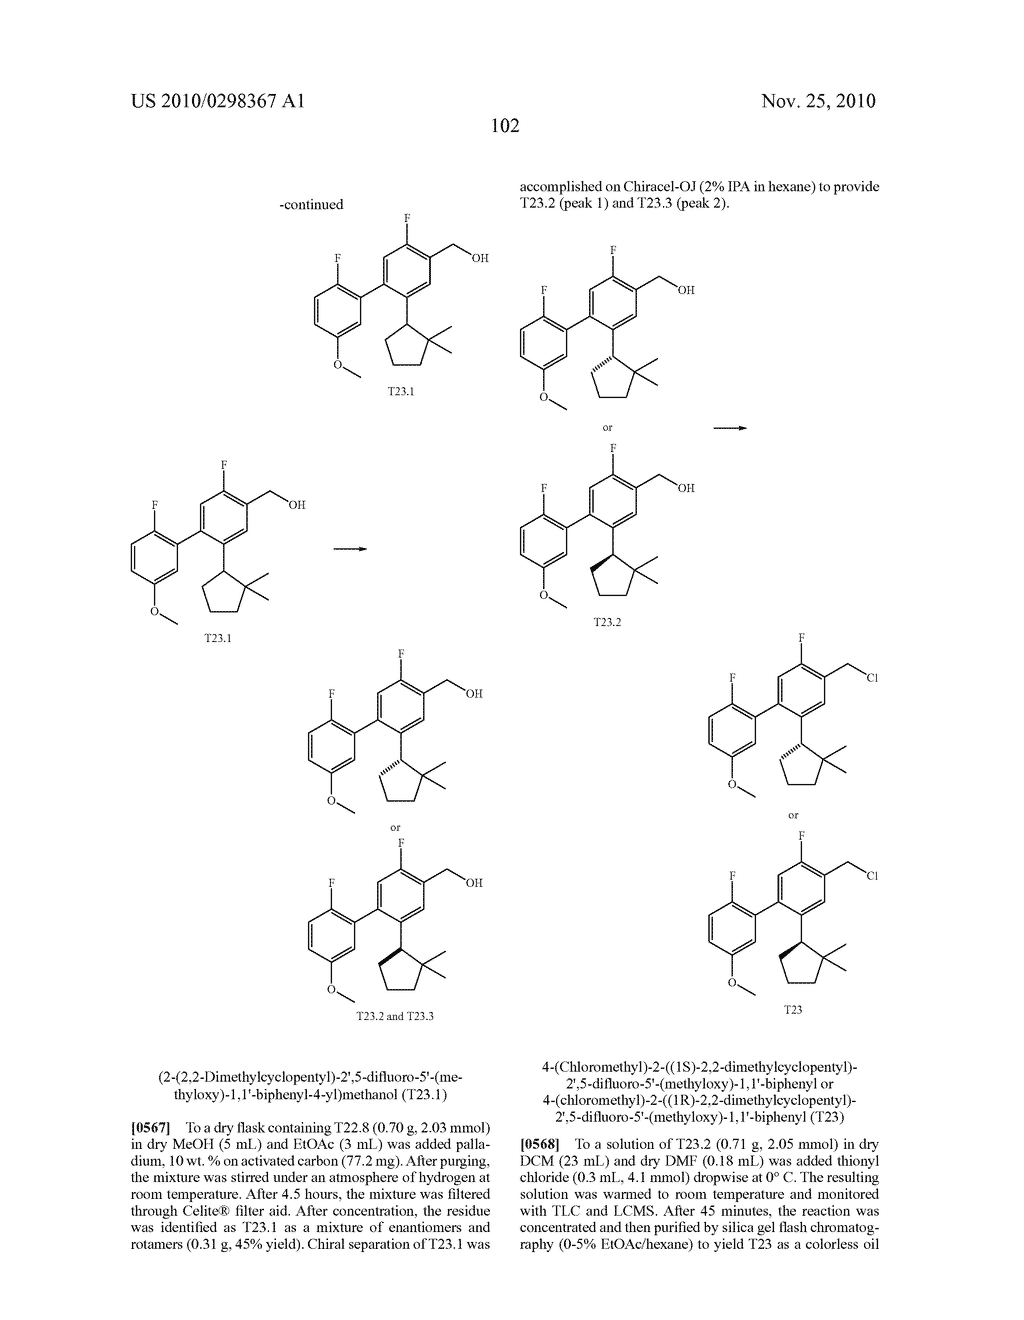 Conformationally Constrained Carboxylic Acid Derivatives Useful for Treating Metabolic Disorders - diagram, schematic, and image 104